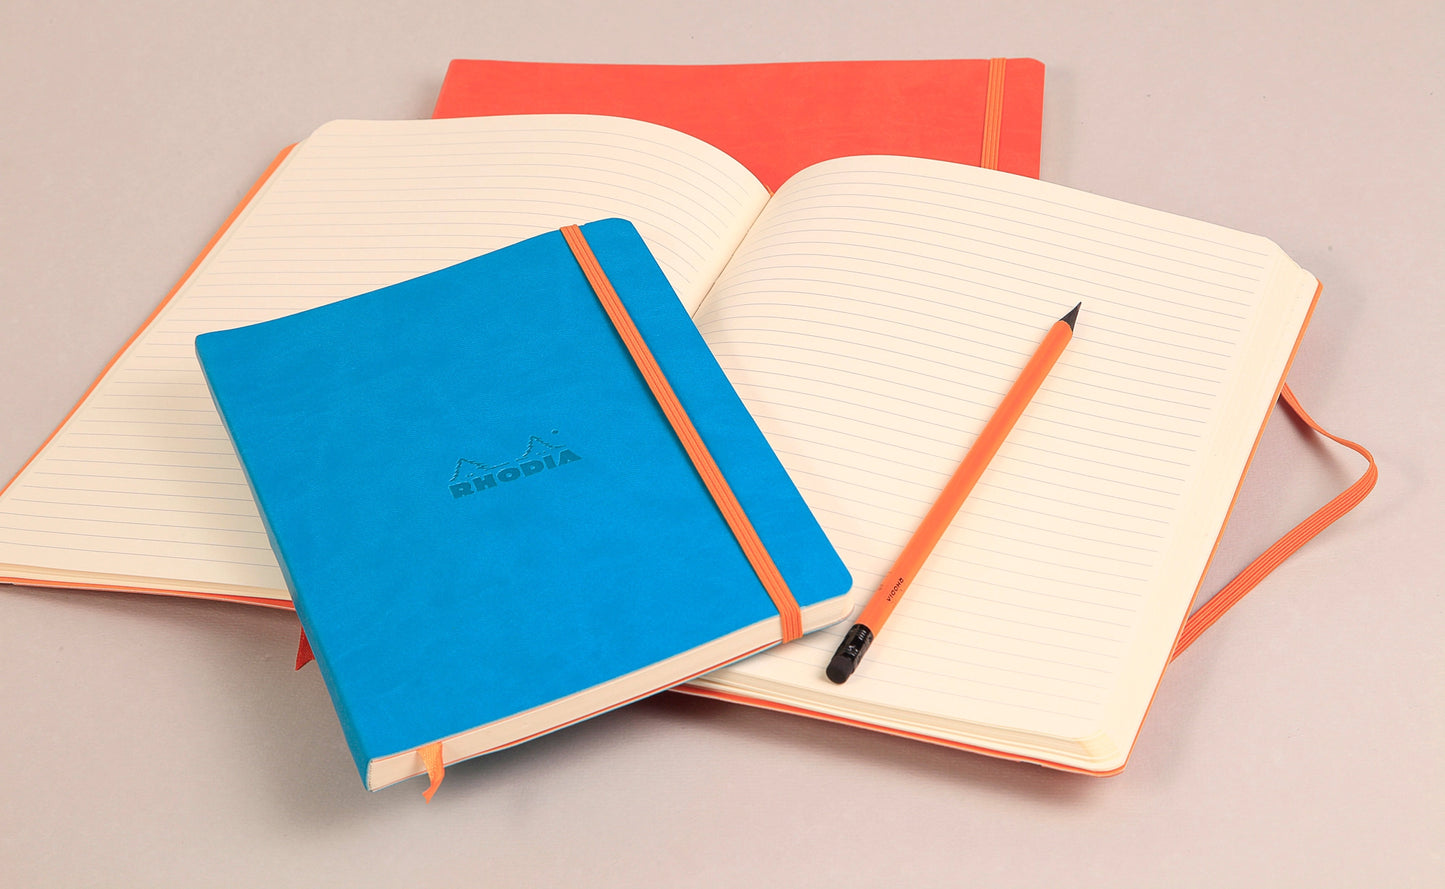 Rhodiarama Softcover Lined Journal